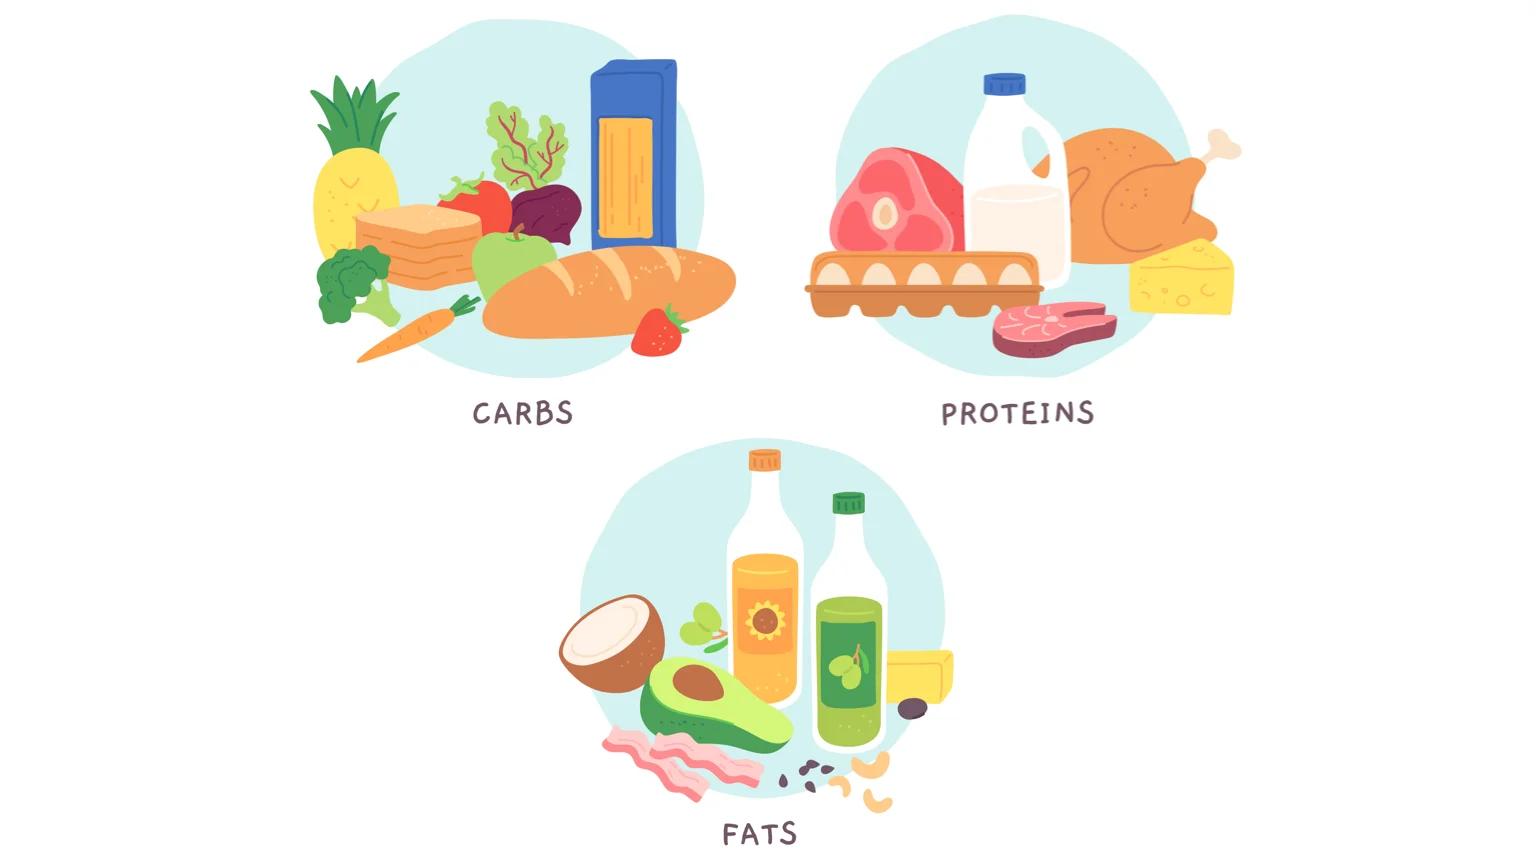 Carbs, proteins and fats and all macro nutrients. This image shows common food sources for each kind of macronutrient.